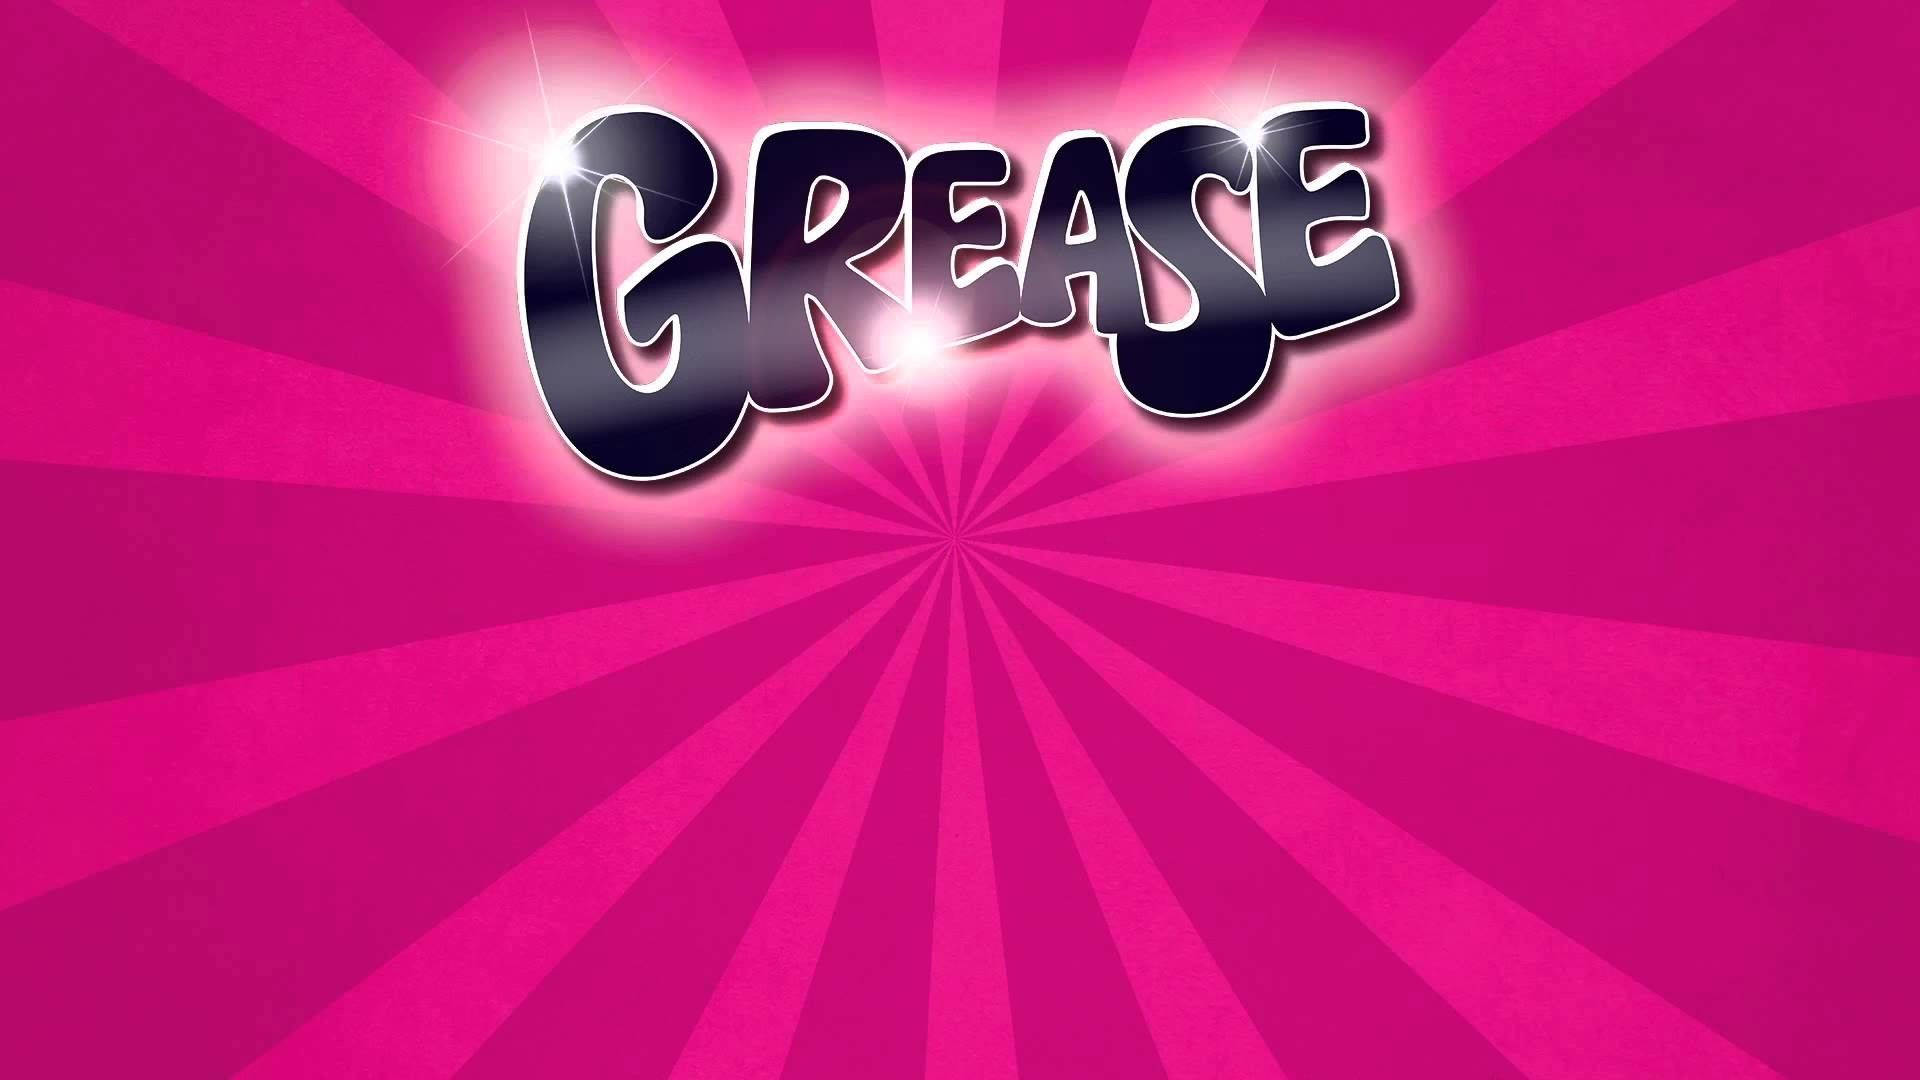 Grease Seventies Style Lettering Background